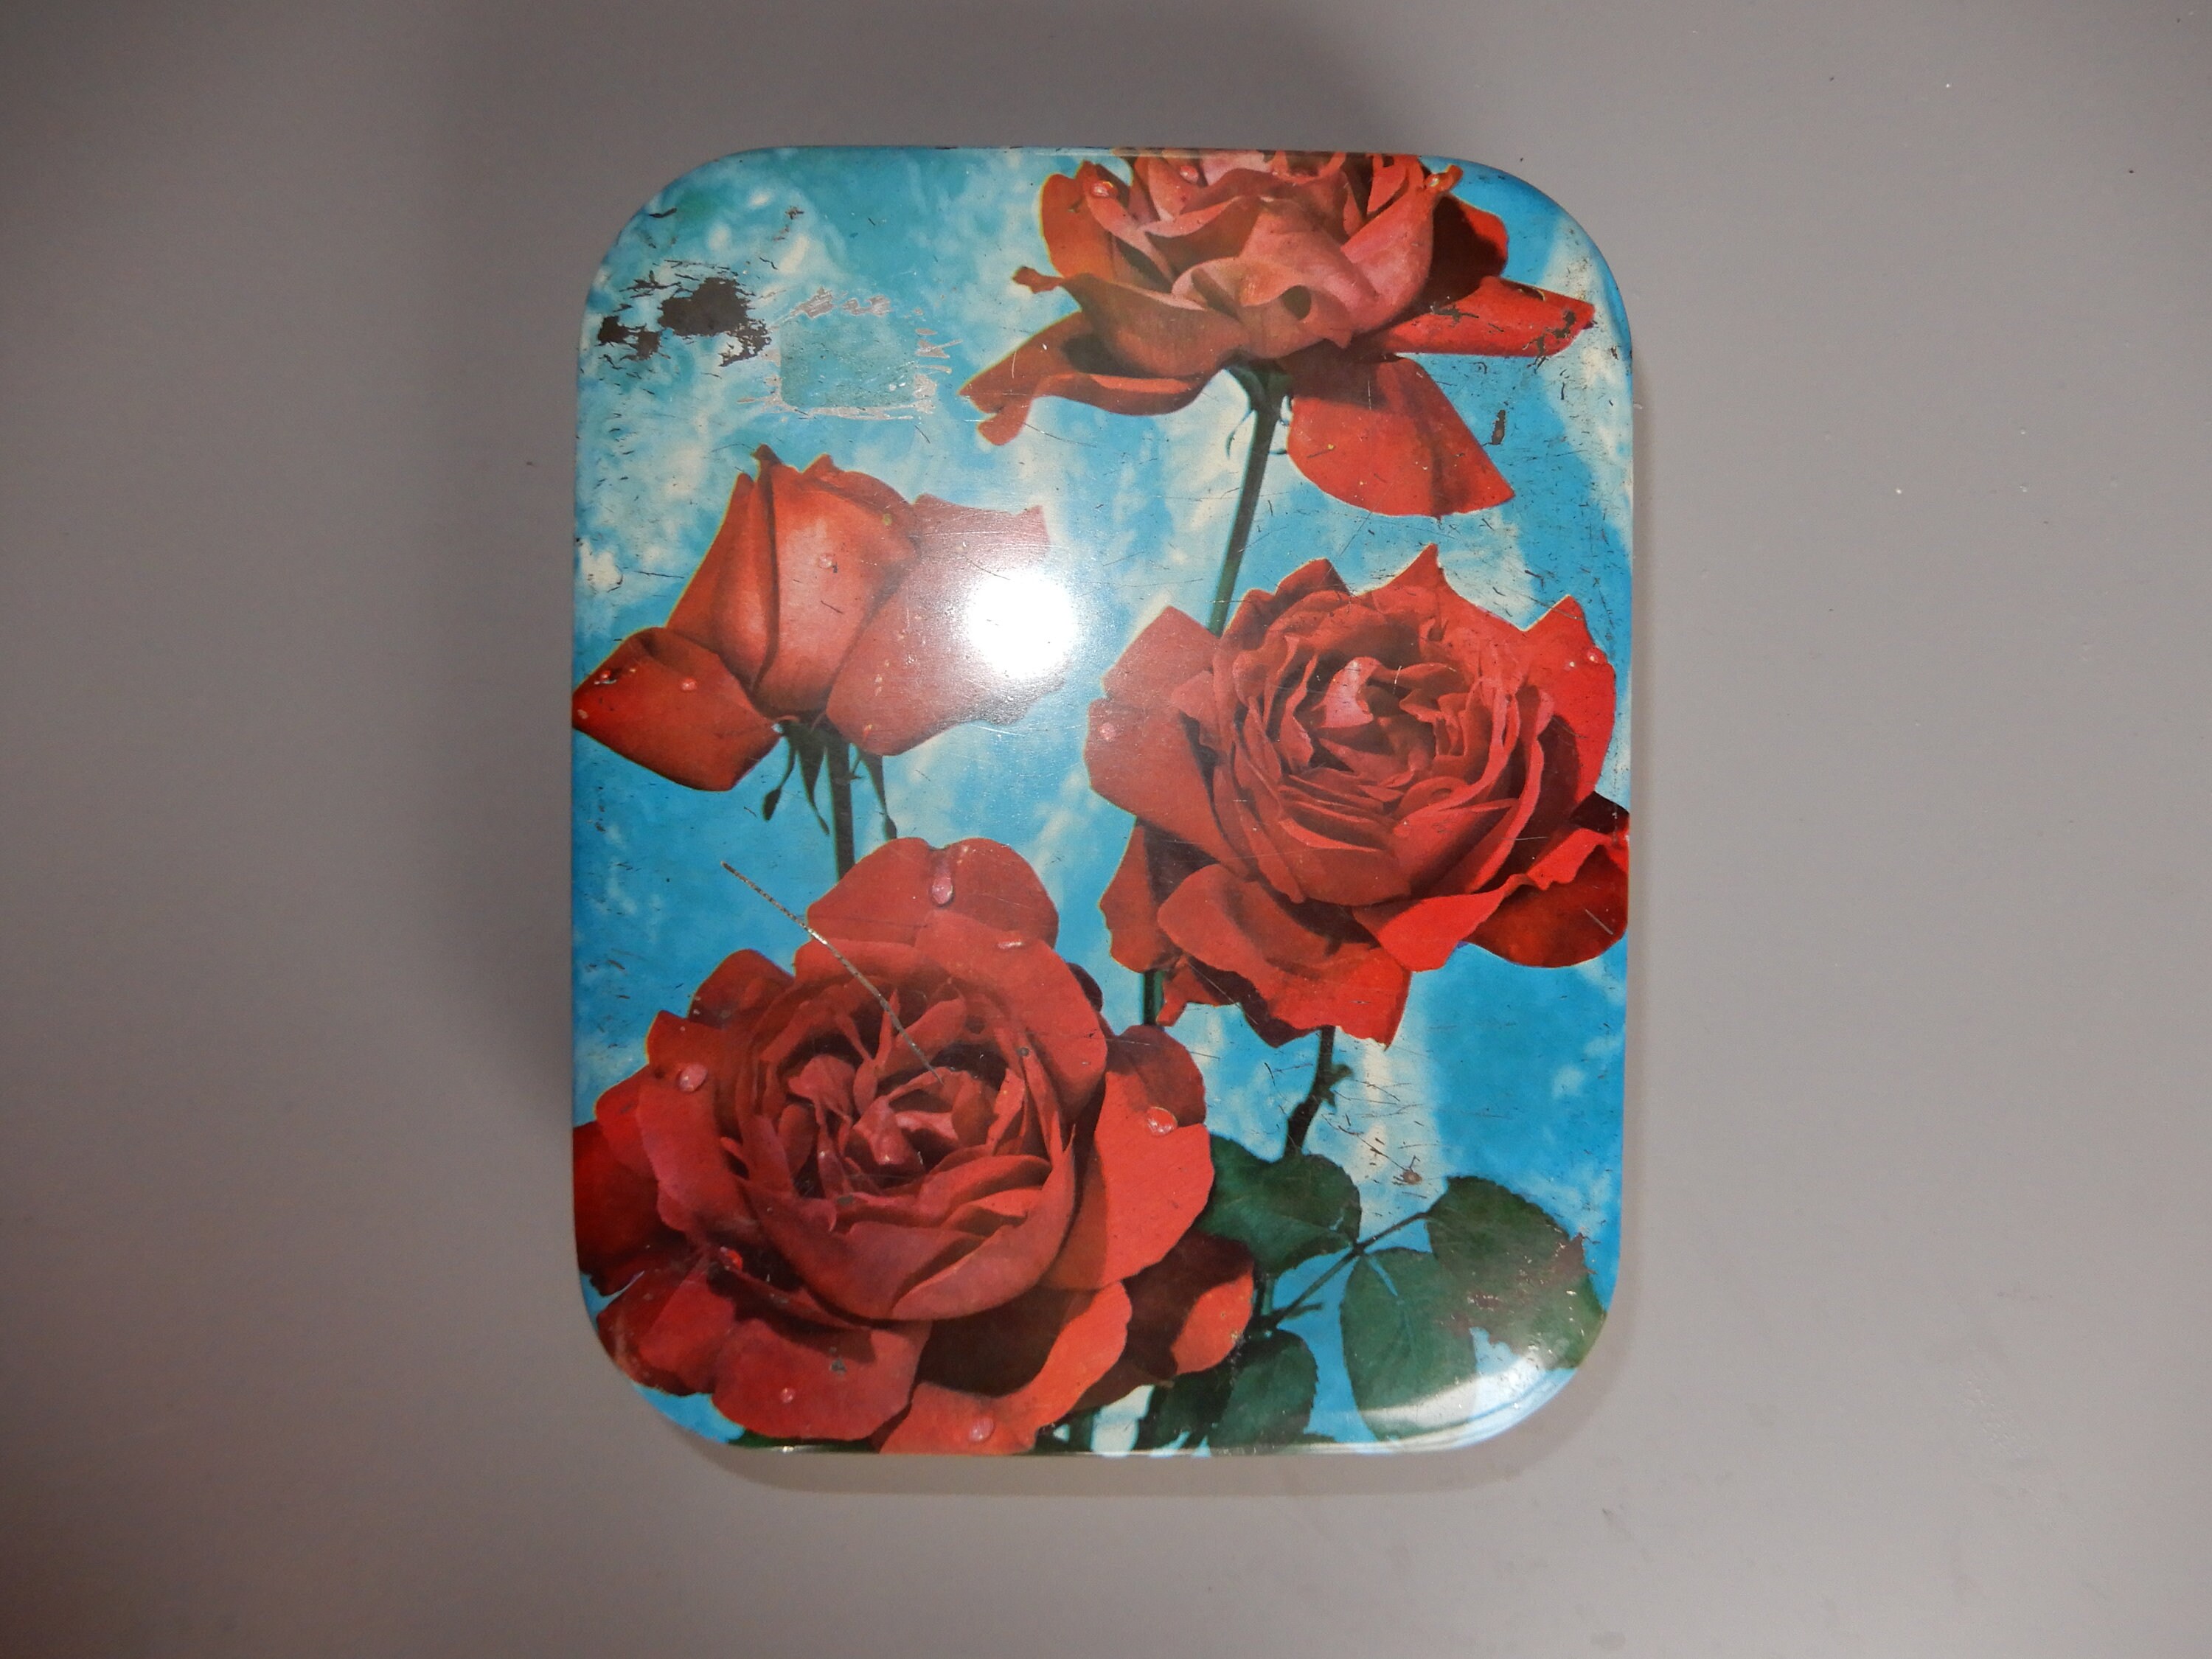 Vintage Old Red Roses Tin Heller Tin Box Candy Chocolate - Etsy